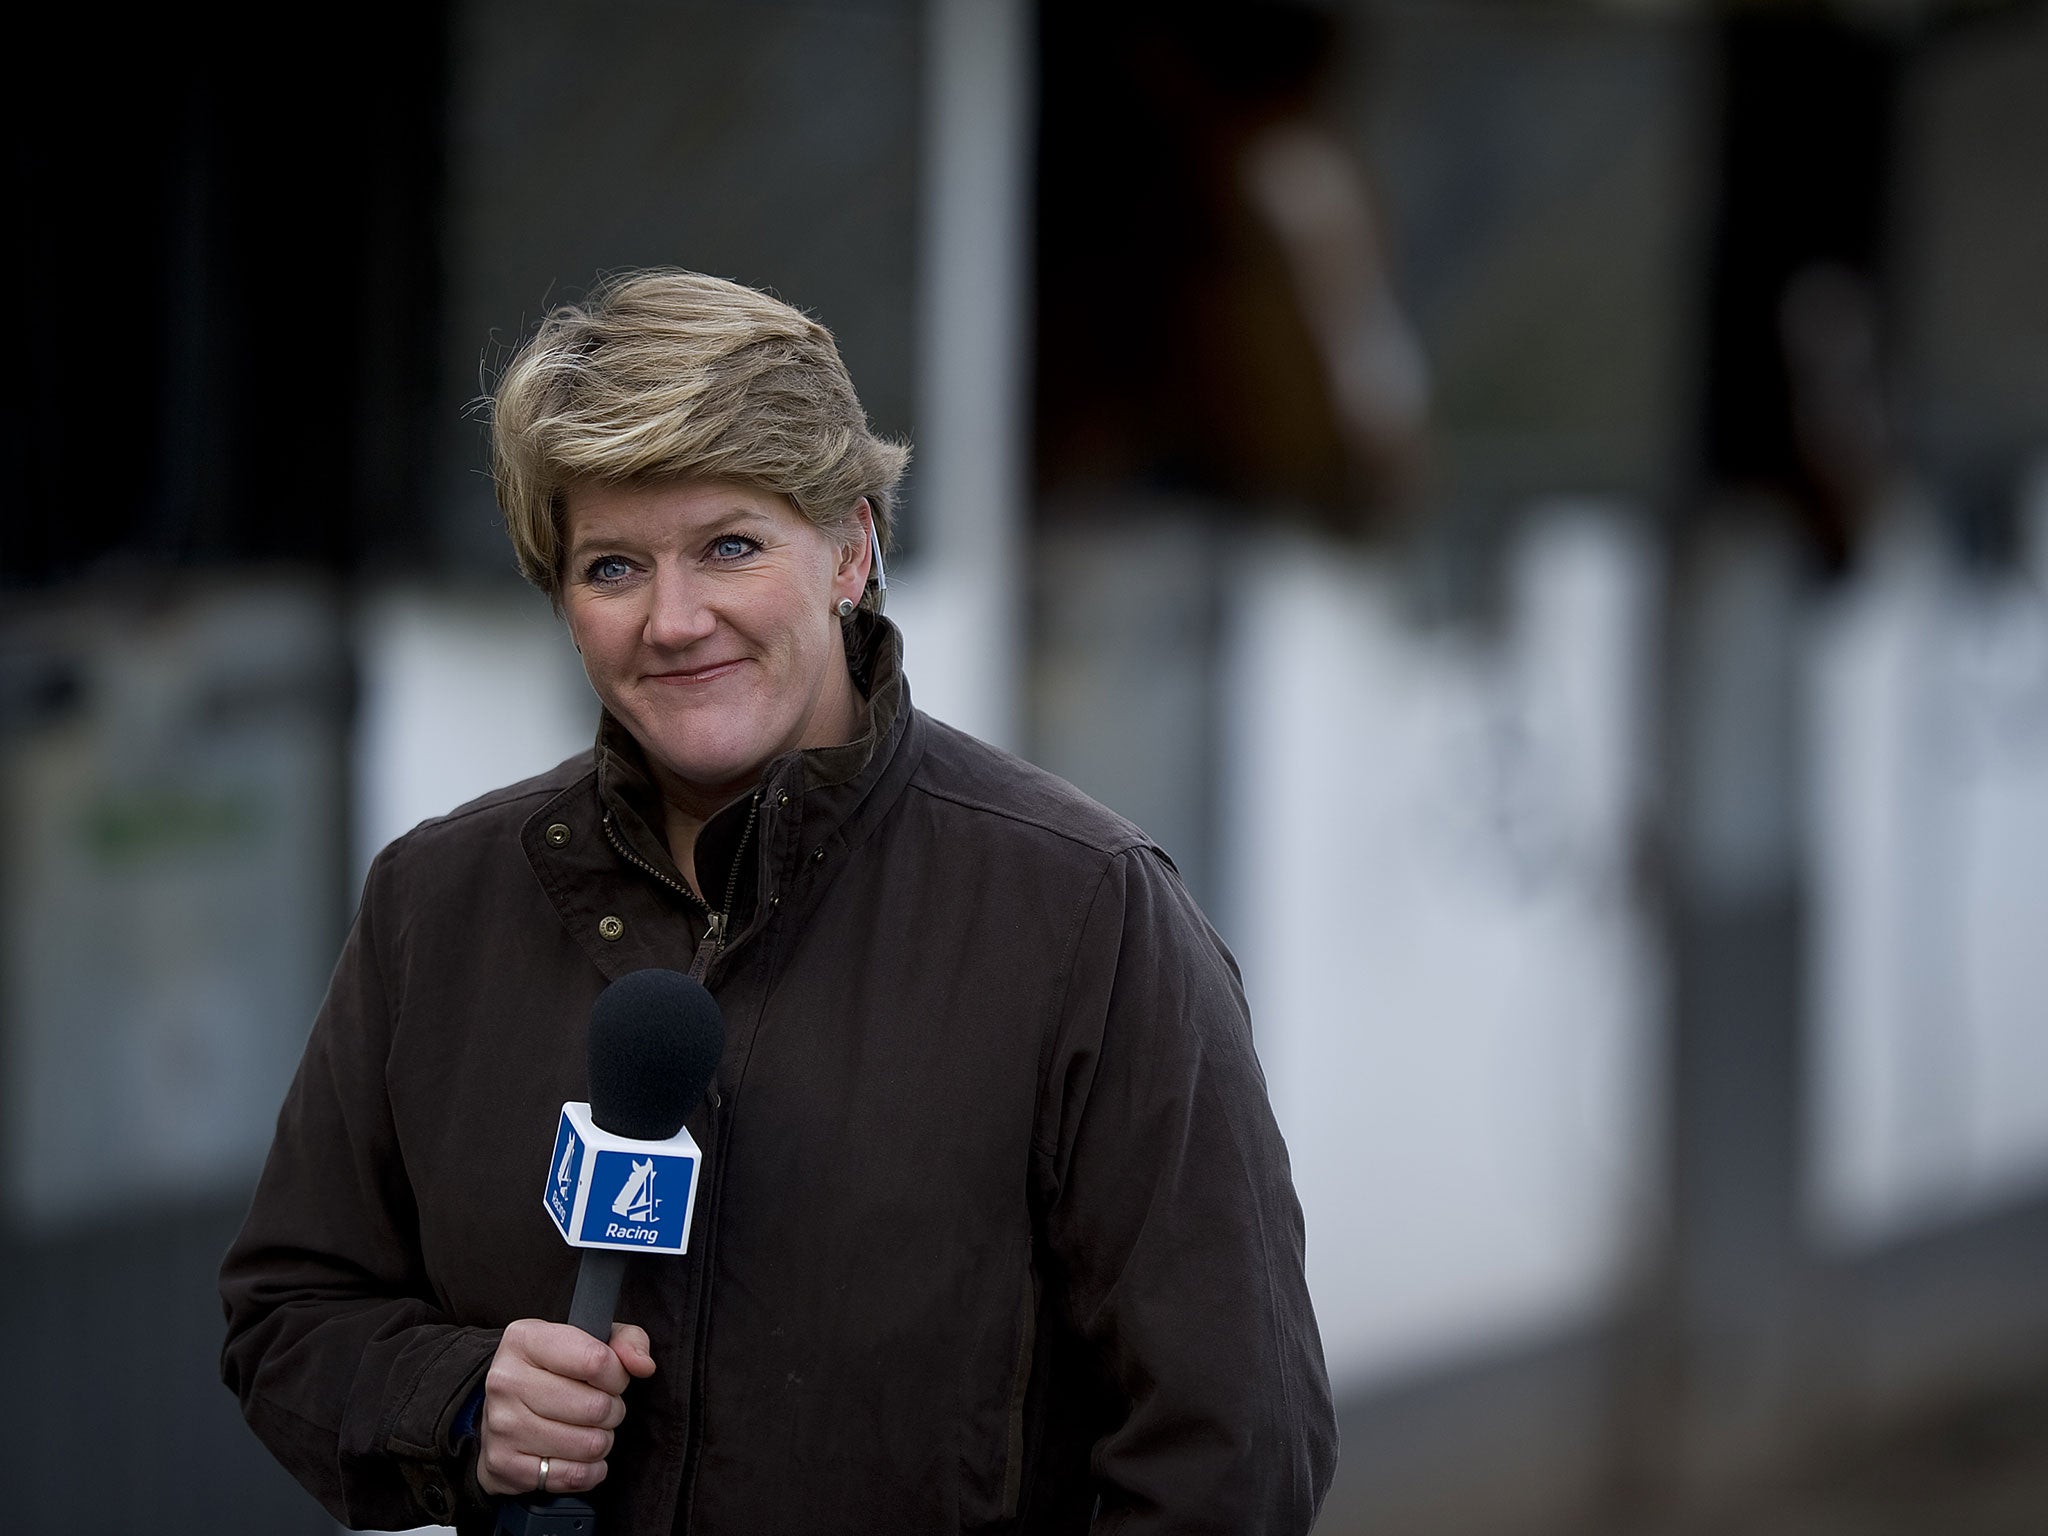 Clare Balding presents Channel 4 Racing as it broadcast its first programme produced by IMG at Nicky Henderson's Seven Barrows Stables on January 01, 2013 in Lambourn, England.